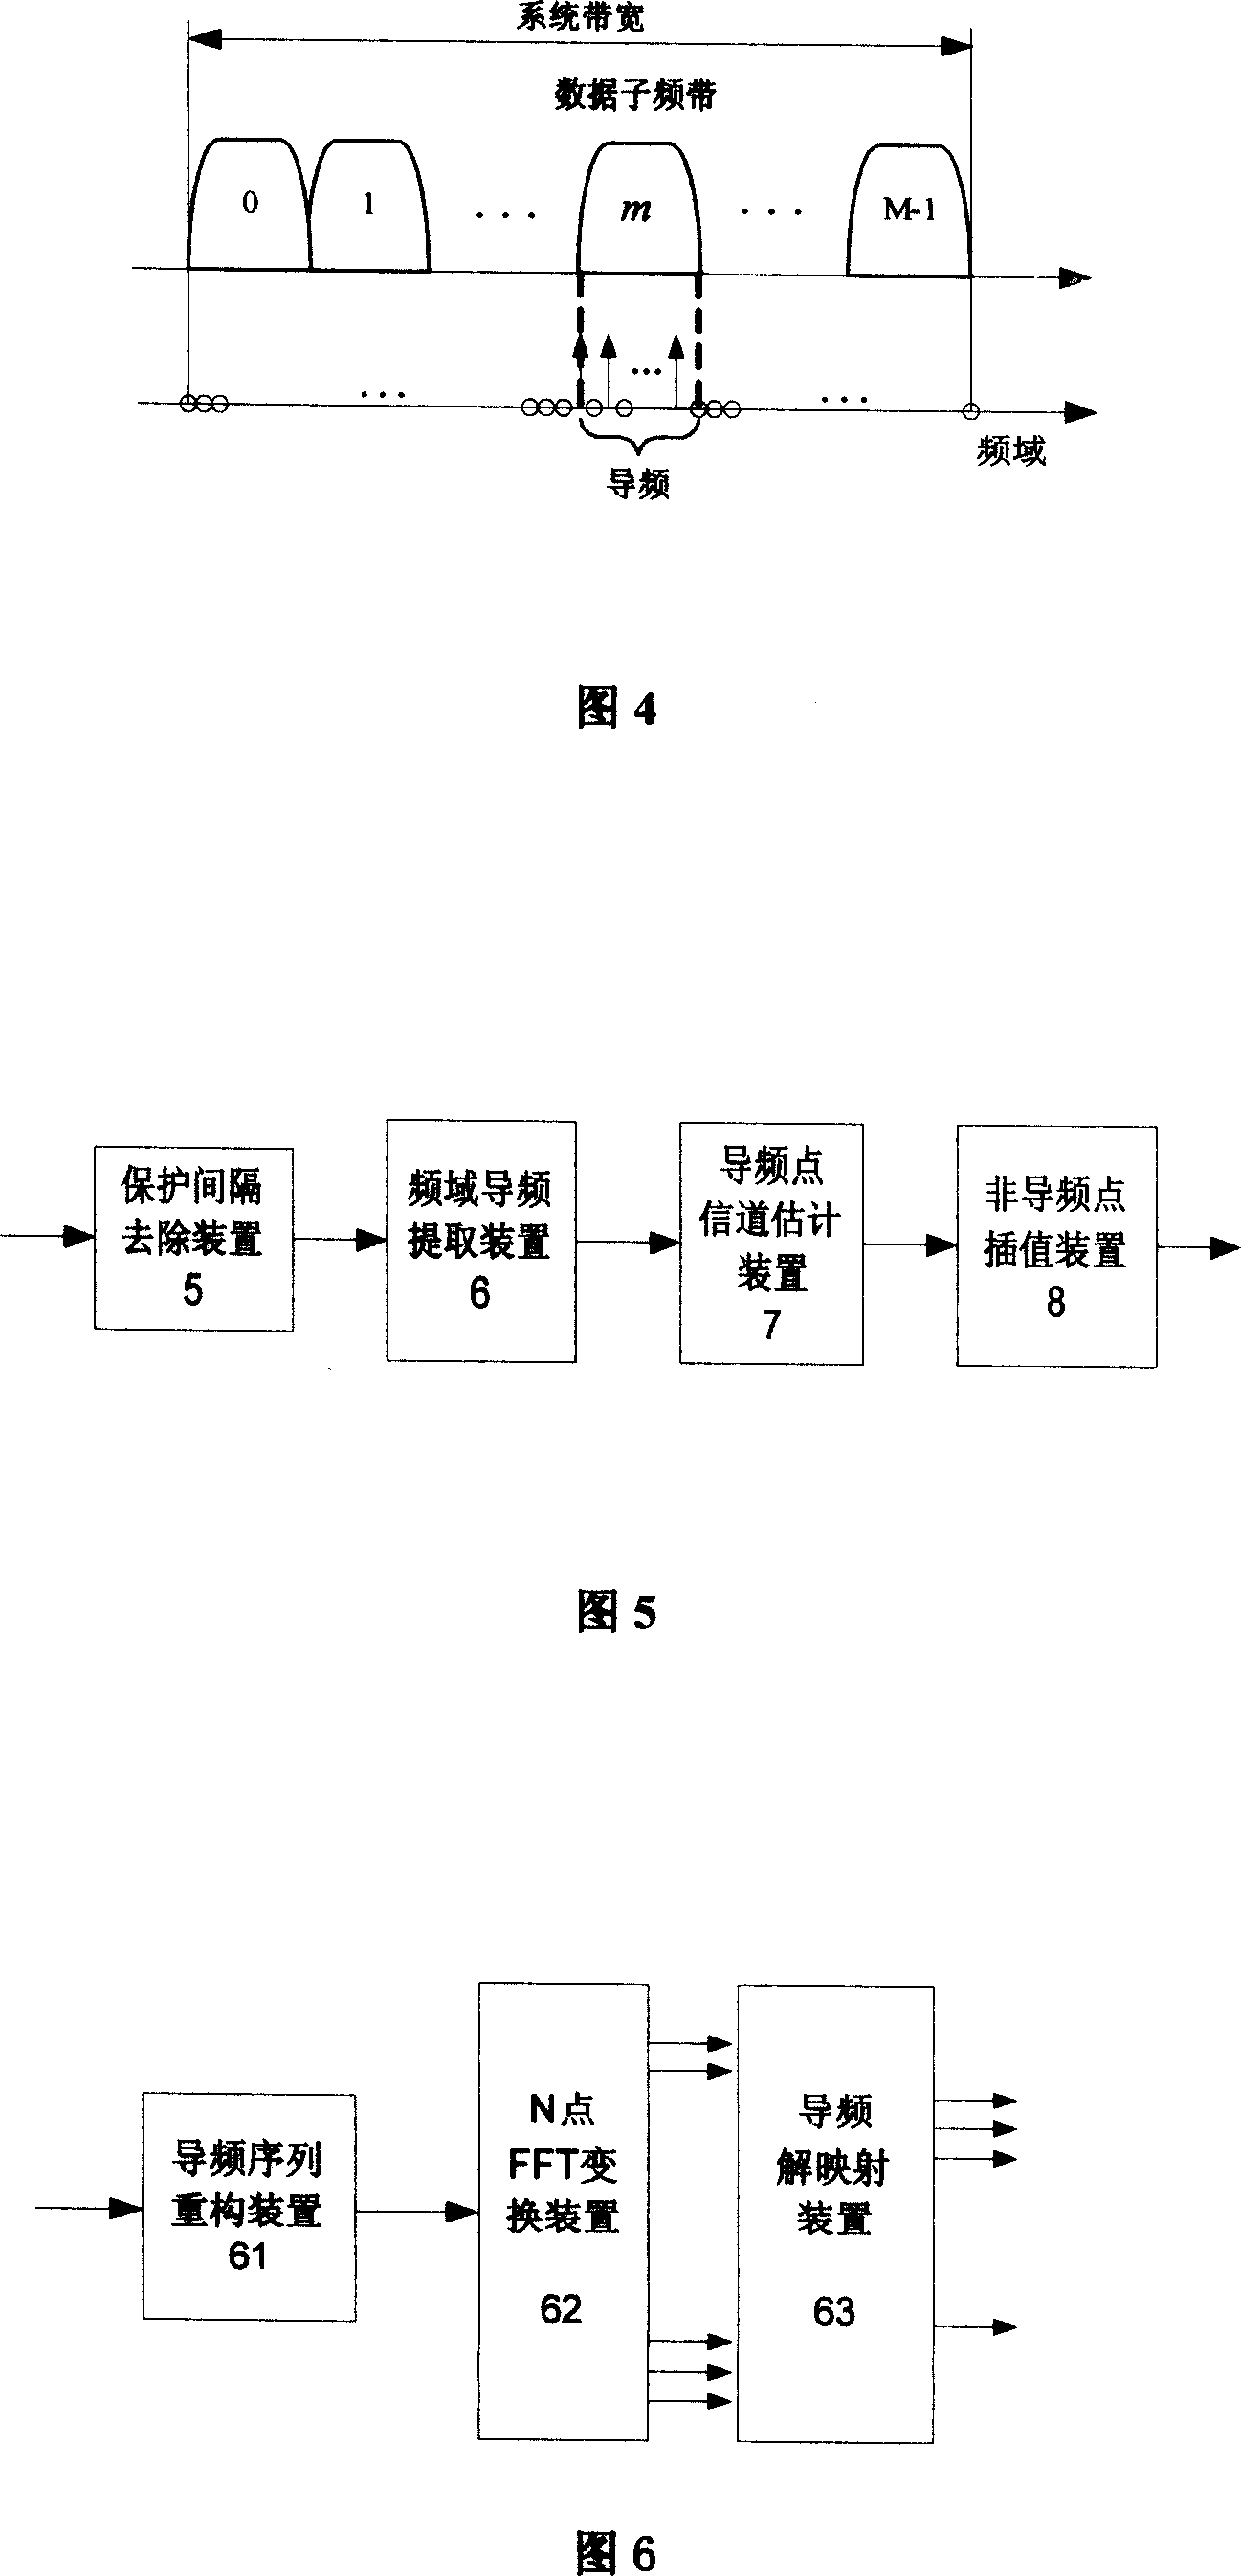 Channel estimation emitting-receiving device and method